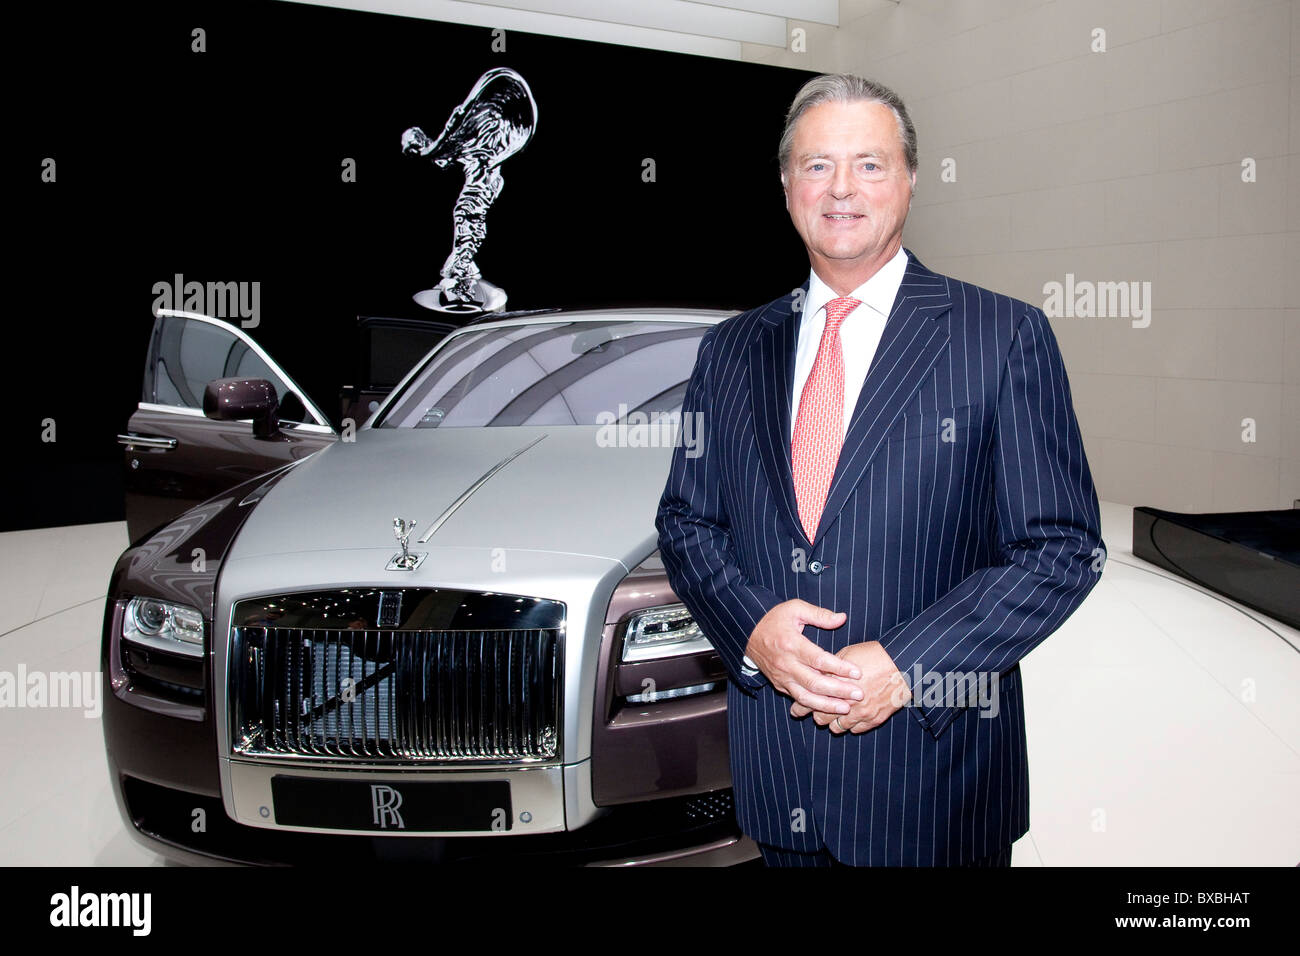 Tom Purves, chairman and CEO of the Rolls-Royce auto brand, which is part of the BMW Group, presenting the new Rolls-Royce Ghost Stock Photo